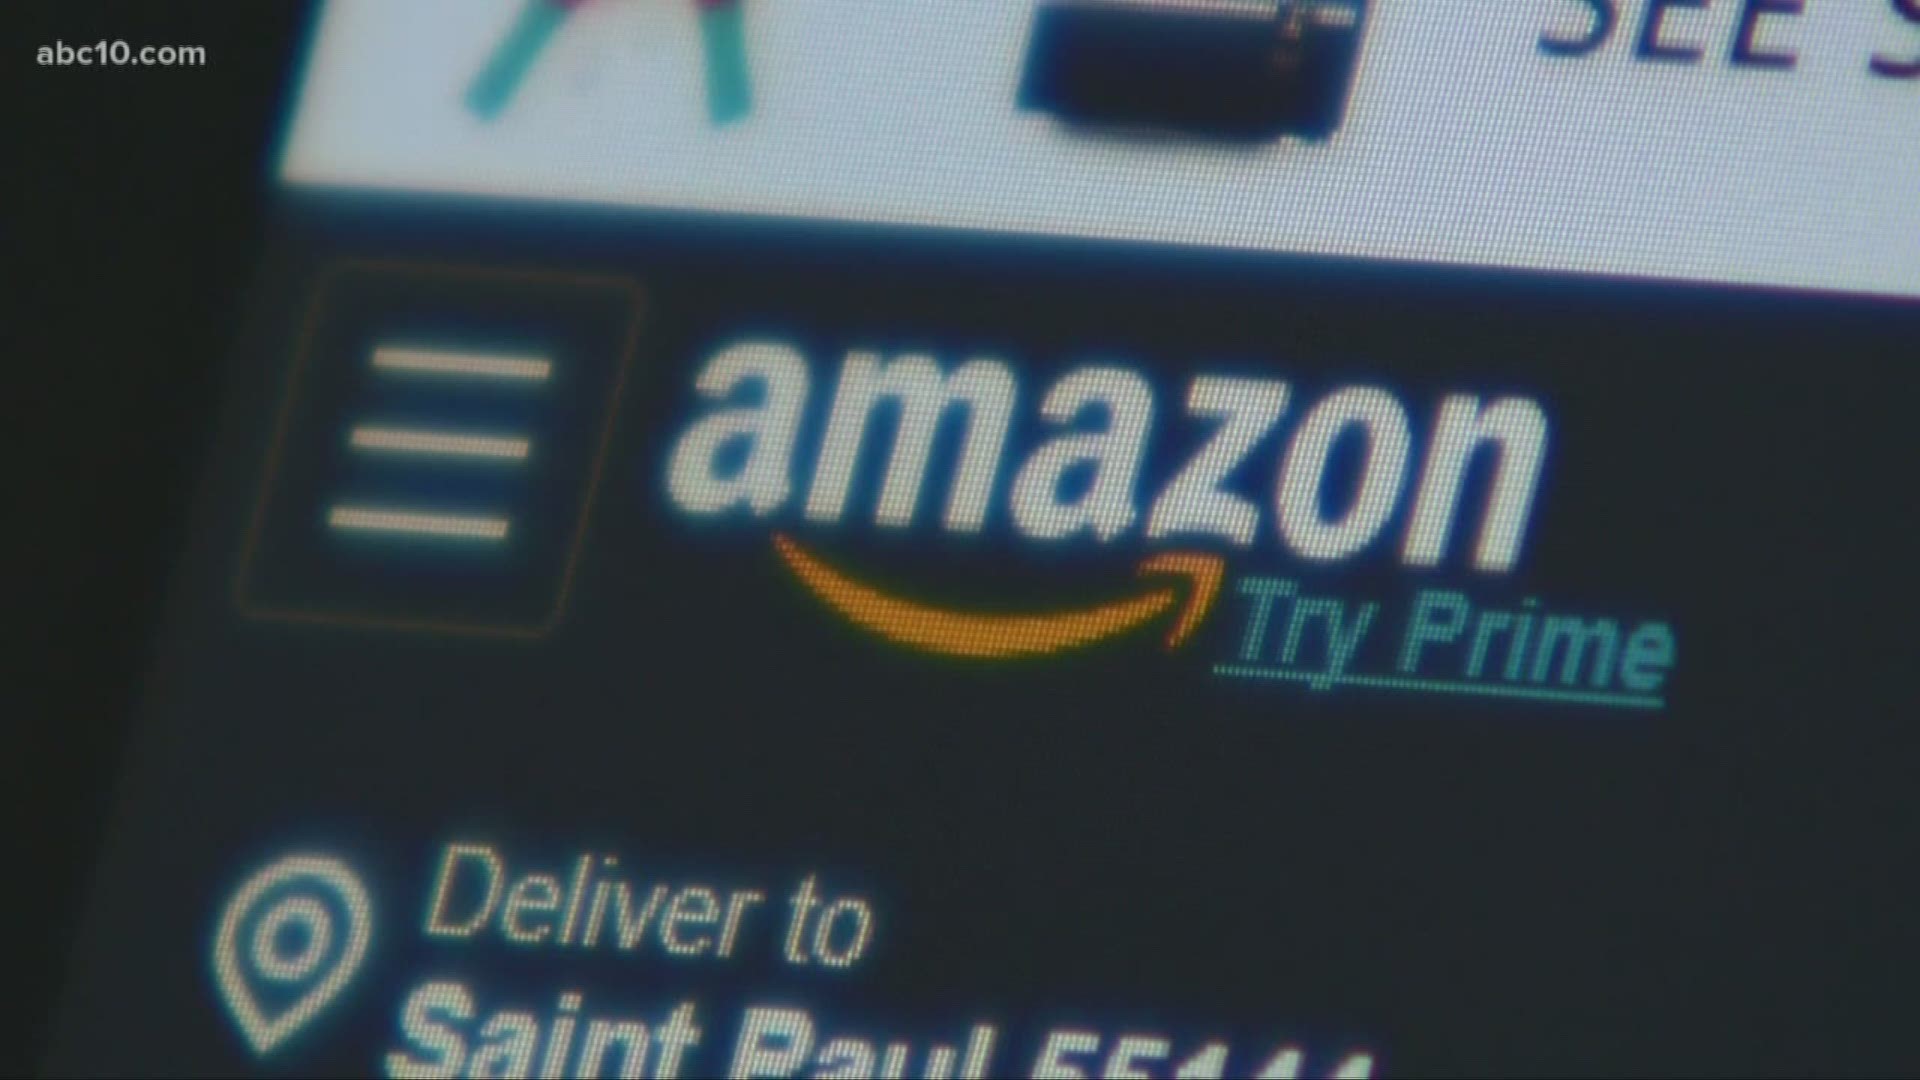 The California Department of Tax and Fee Administration is targeting online retailers who sell through the Fulfillment by Amazon service, coming after them for years of unpaid state sales taxes. One retailer says-- this will bankrupt her small business.